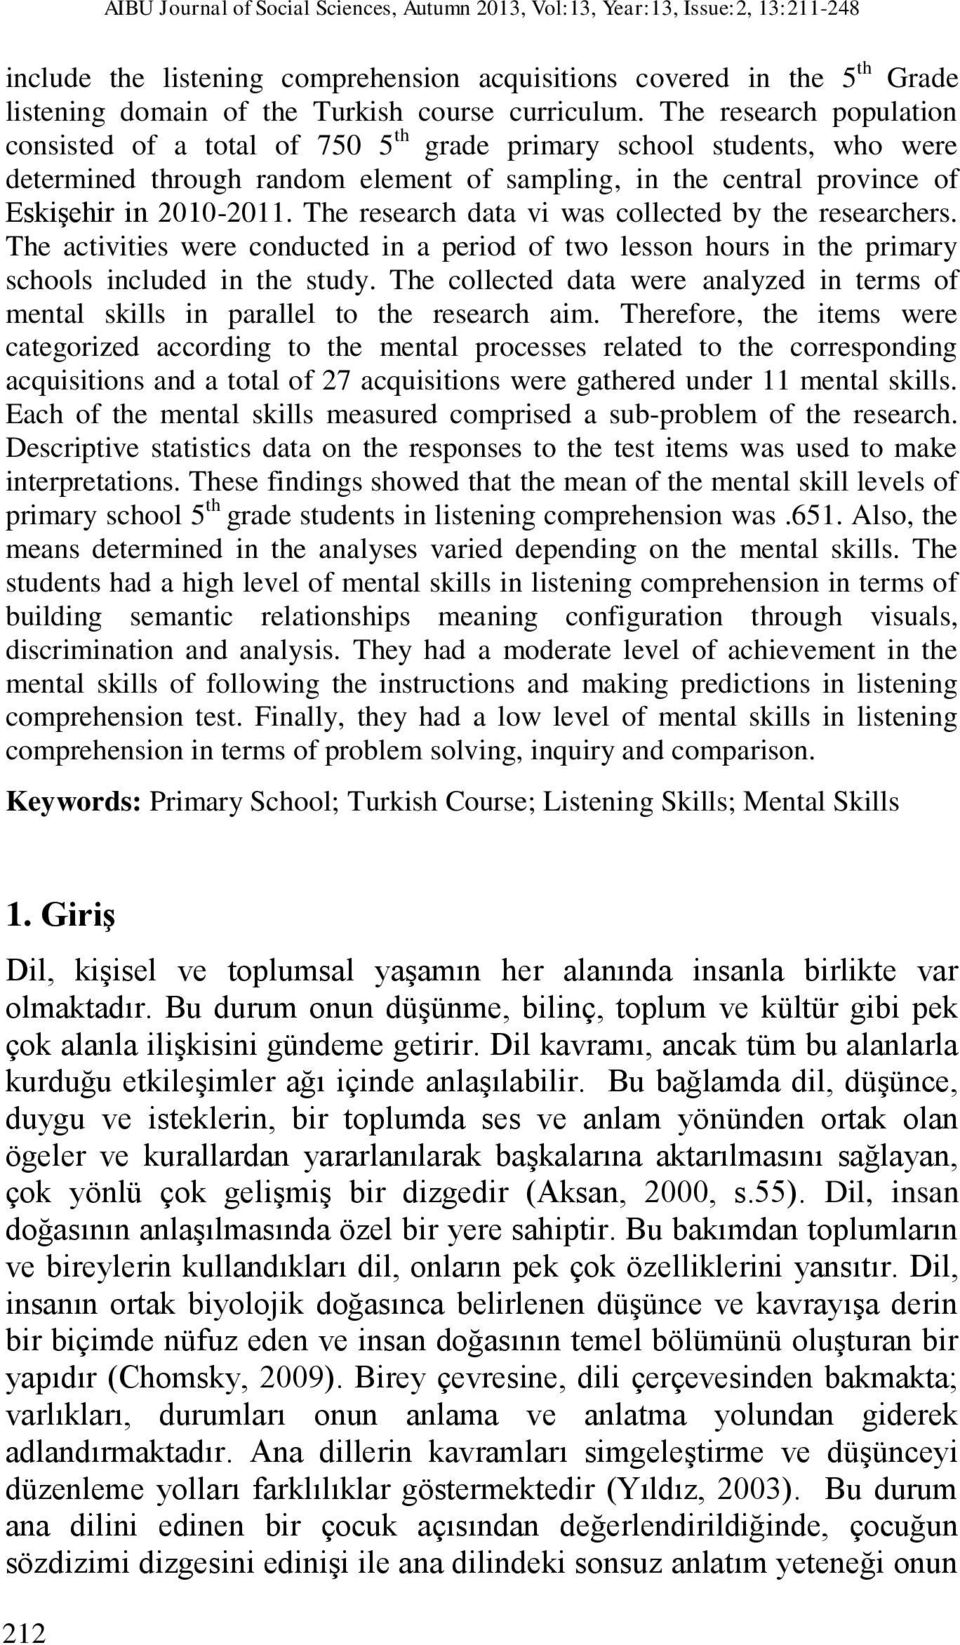 The research population consisted of a total of 750 5 th grade primary school students, who were determined through random element of sampling, in the central province of Eskişehir in 2010-2011.